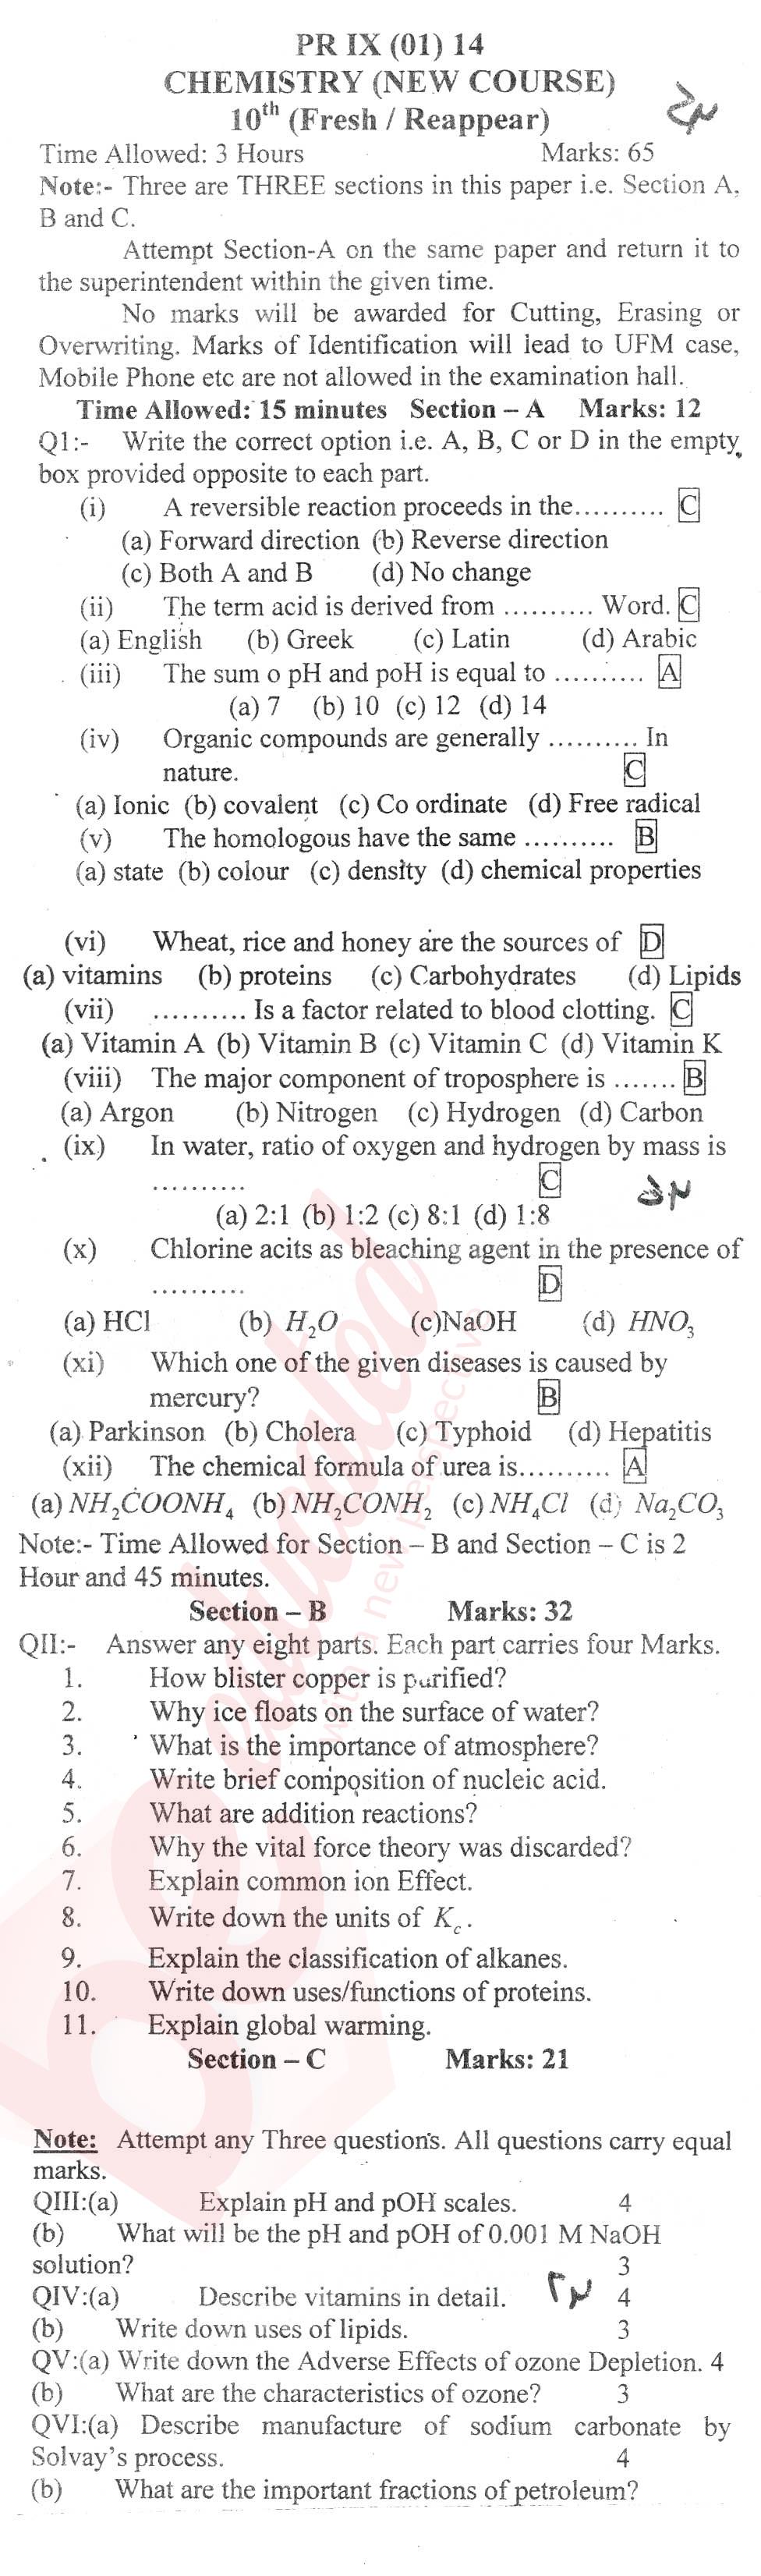 Chemistry 10th English Medium Past Paper Group 1 BISE Bannu 2014